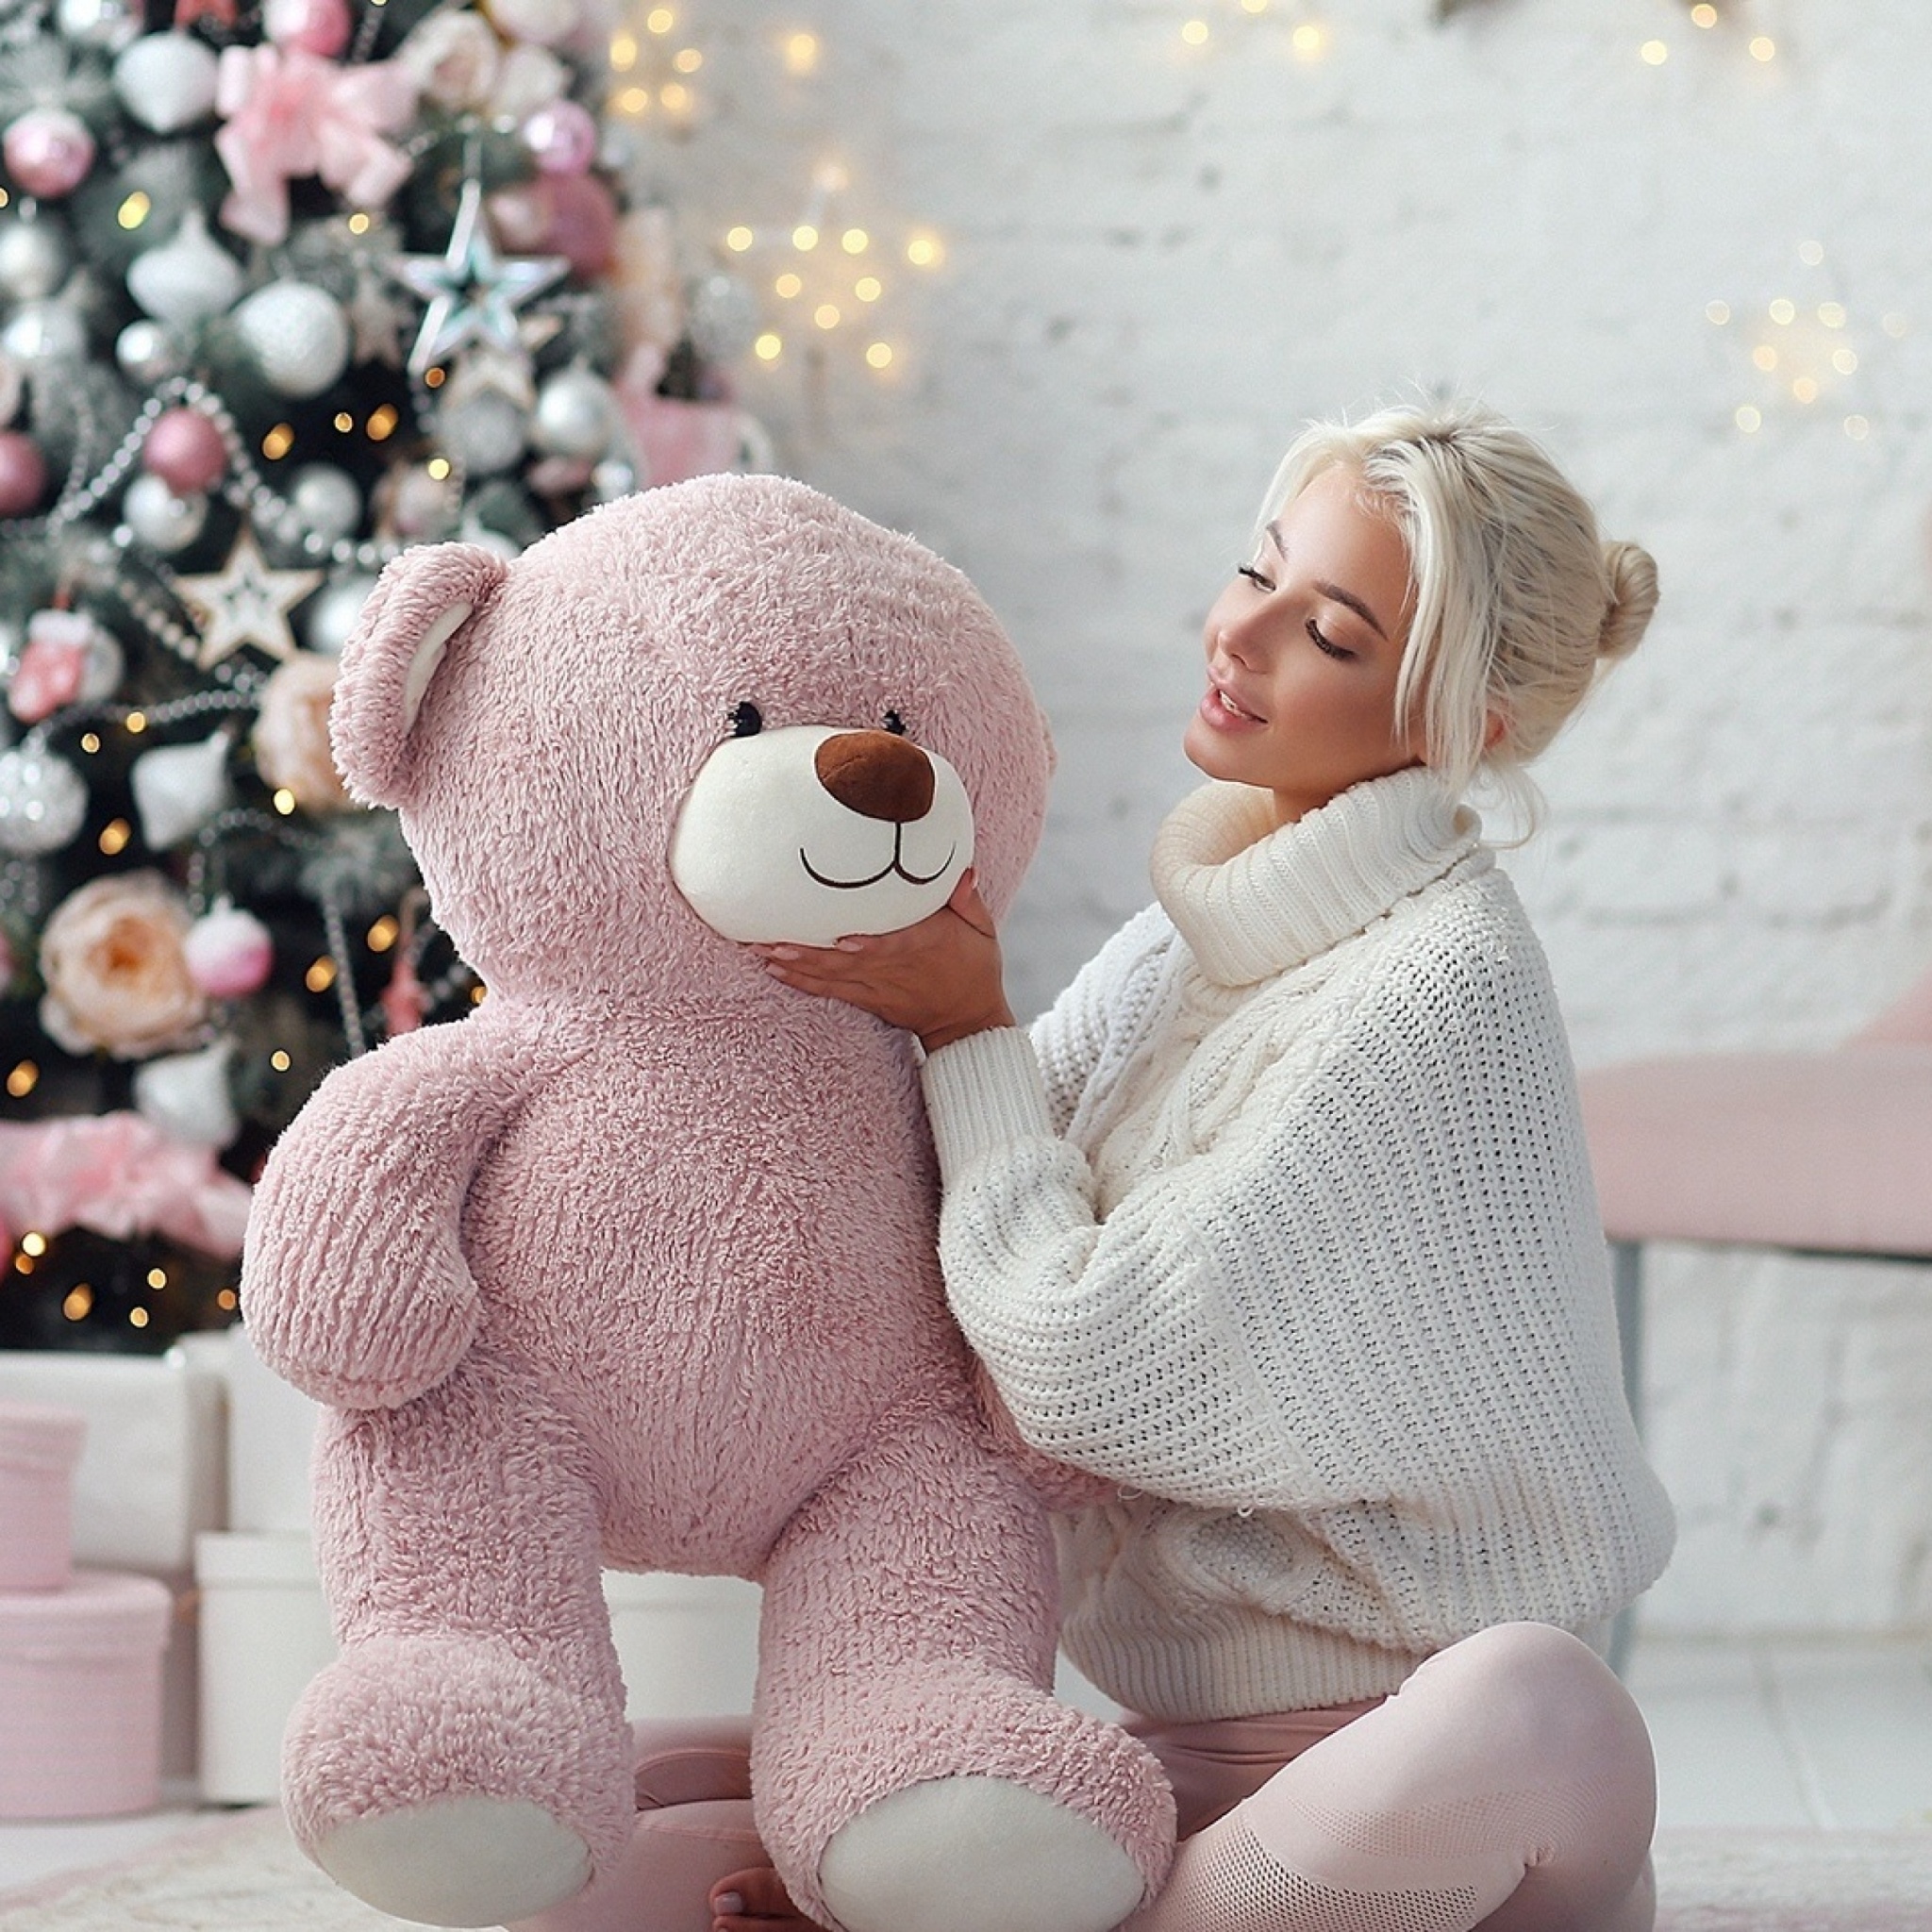 Das Christmas photo session with bear Wallpaper 2048x2048